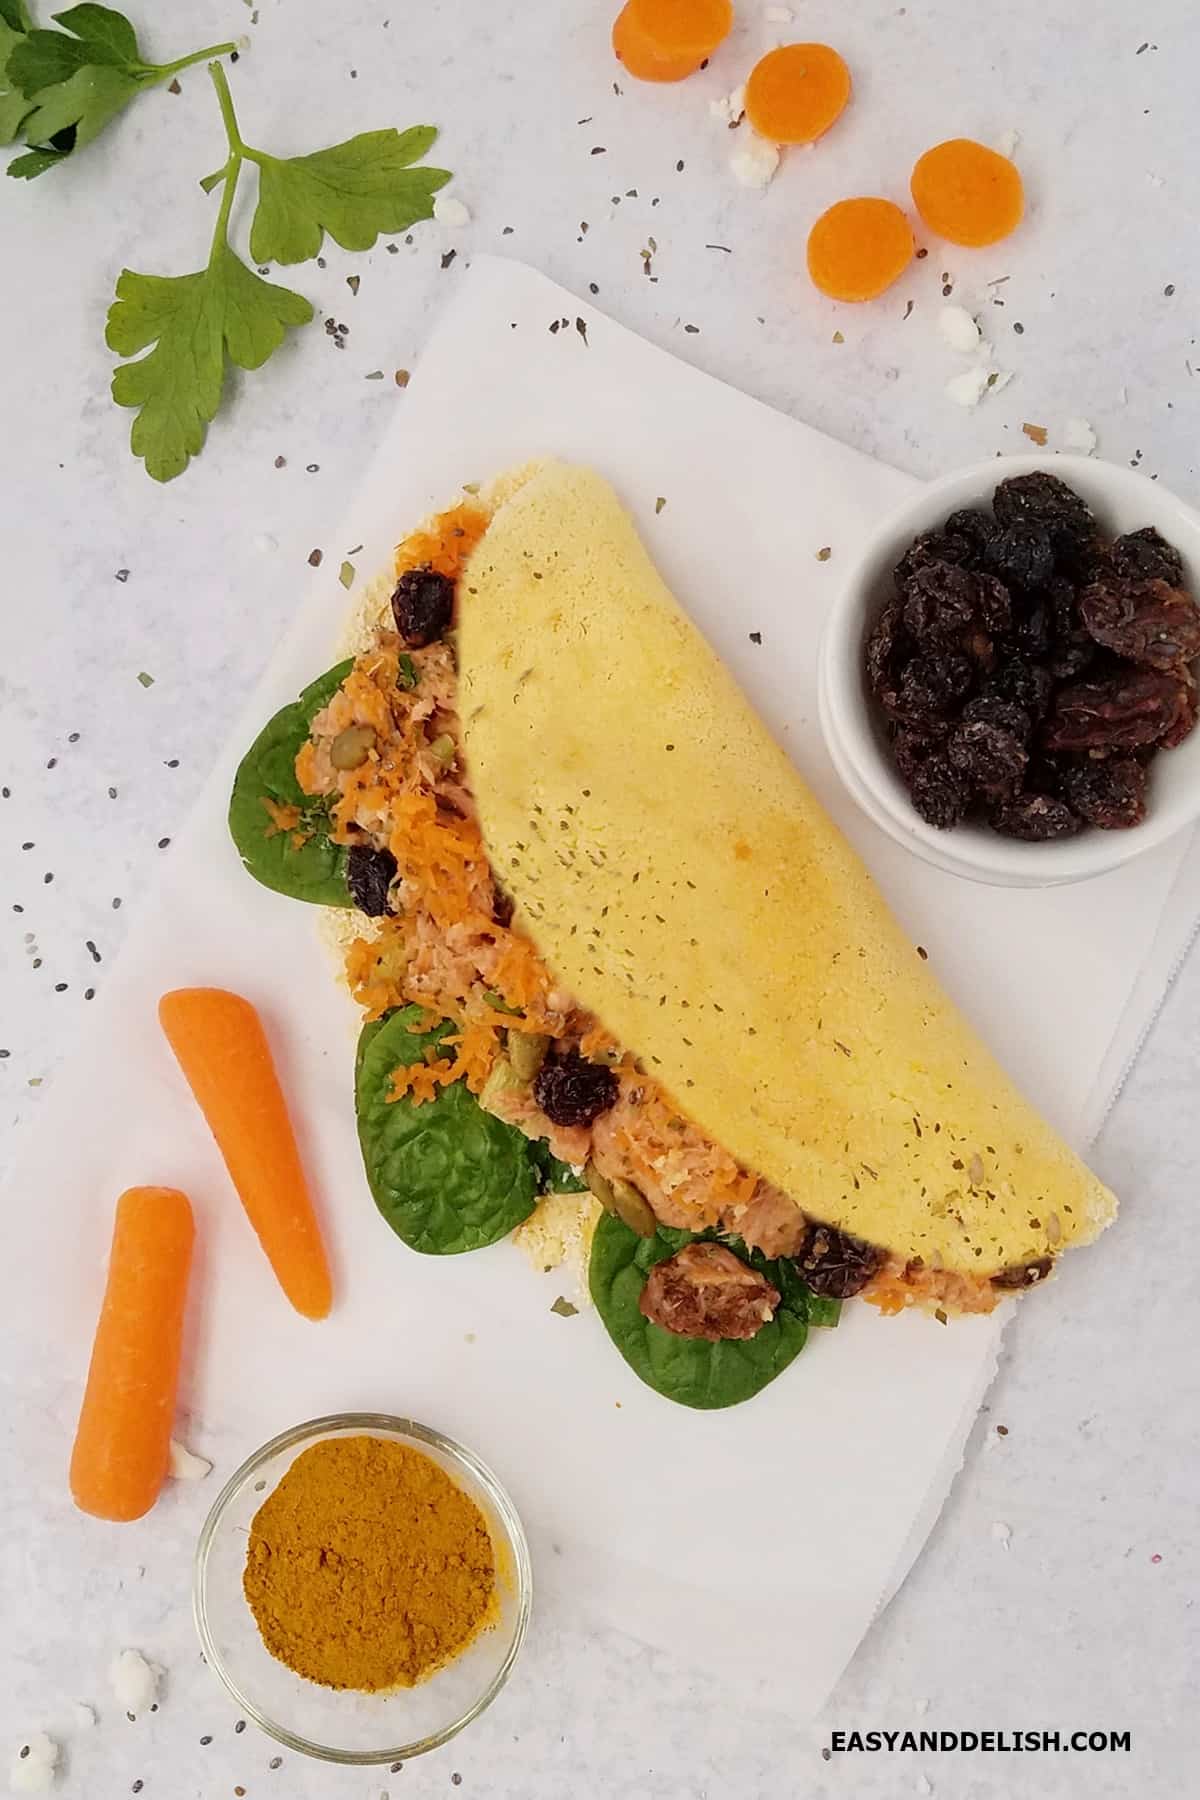 yellow tapioca crepe filled with tuna salad with a few carrots on the side.